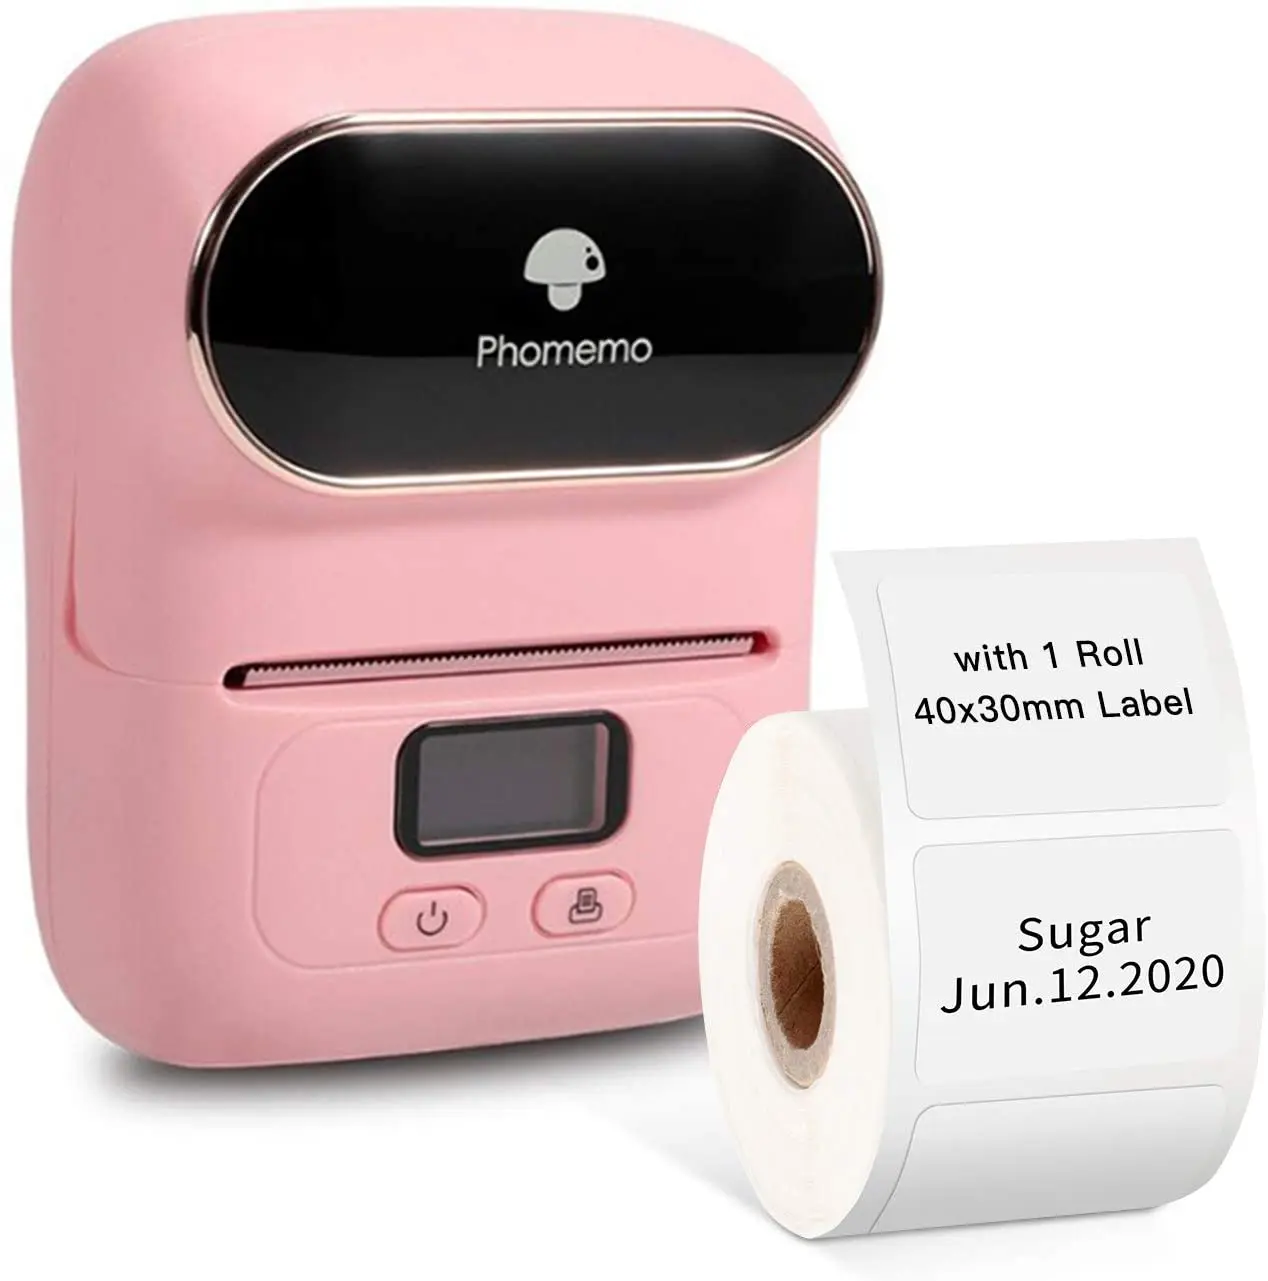 

High Quality Cheap Mini Paper Phomemo M110 Thermal Label Printer With Color Sticker Labels for Mobile Phone